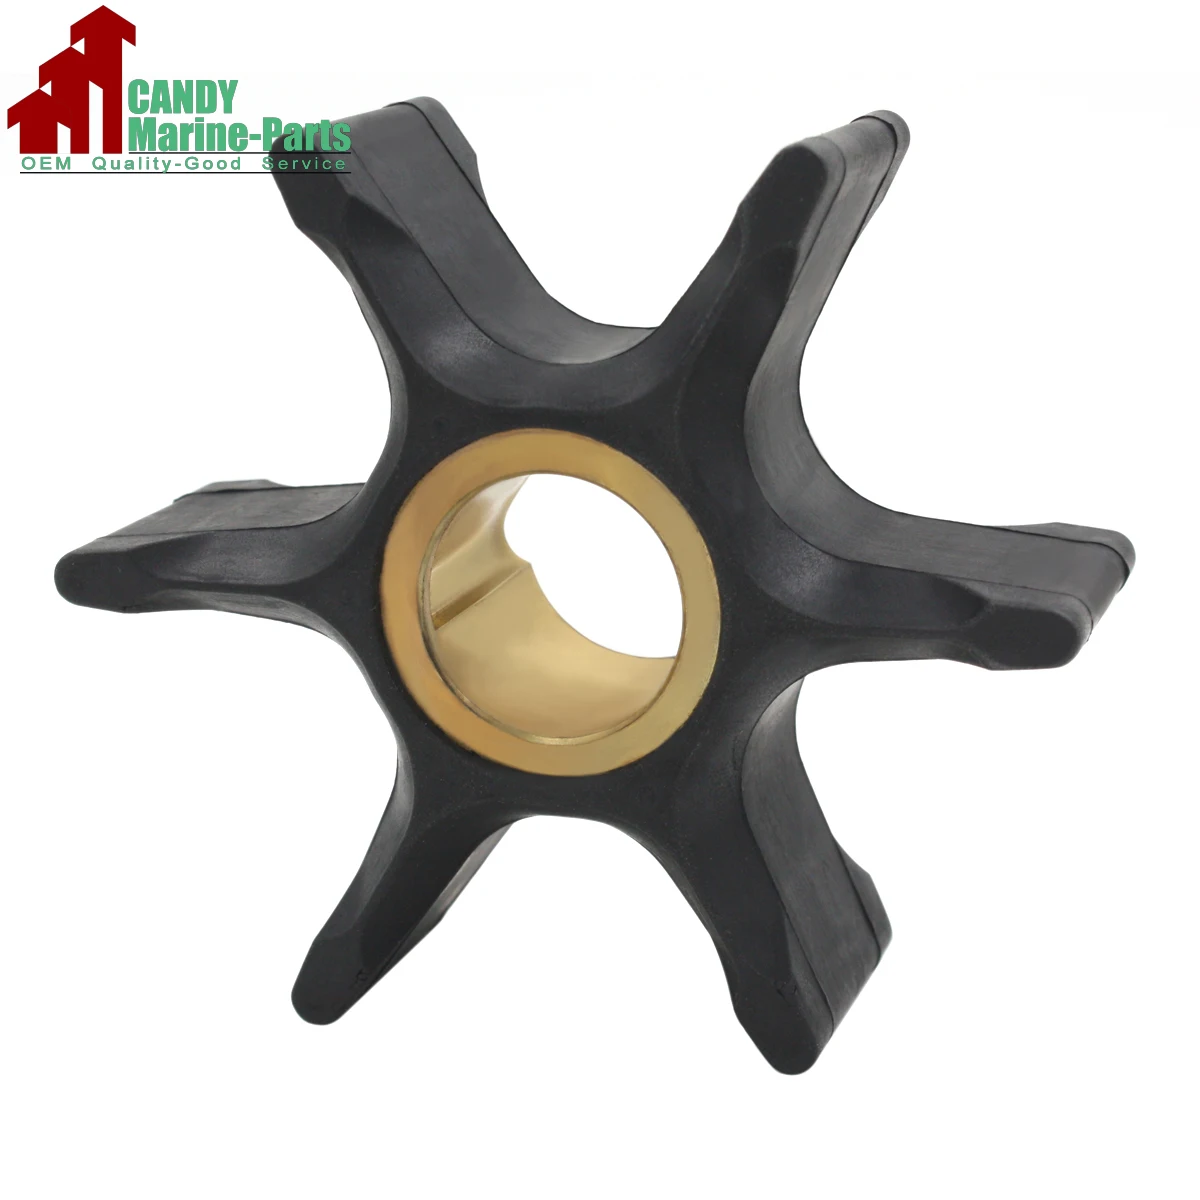 

5001593 Water Pump Impeller for Johnson Evinrude Outboard Motors 90-300 HP Parts OMC 395864 397131 435821 18-3059